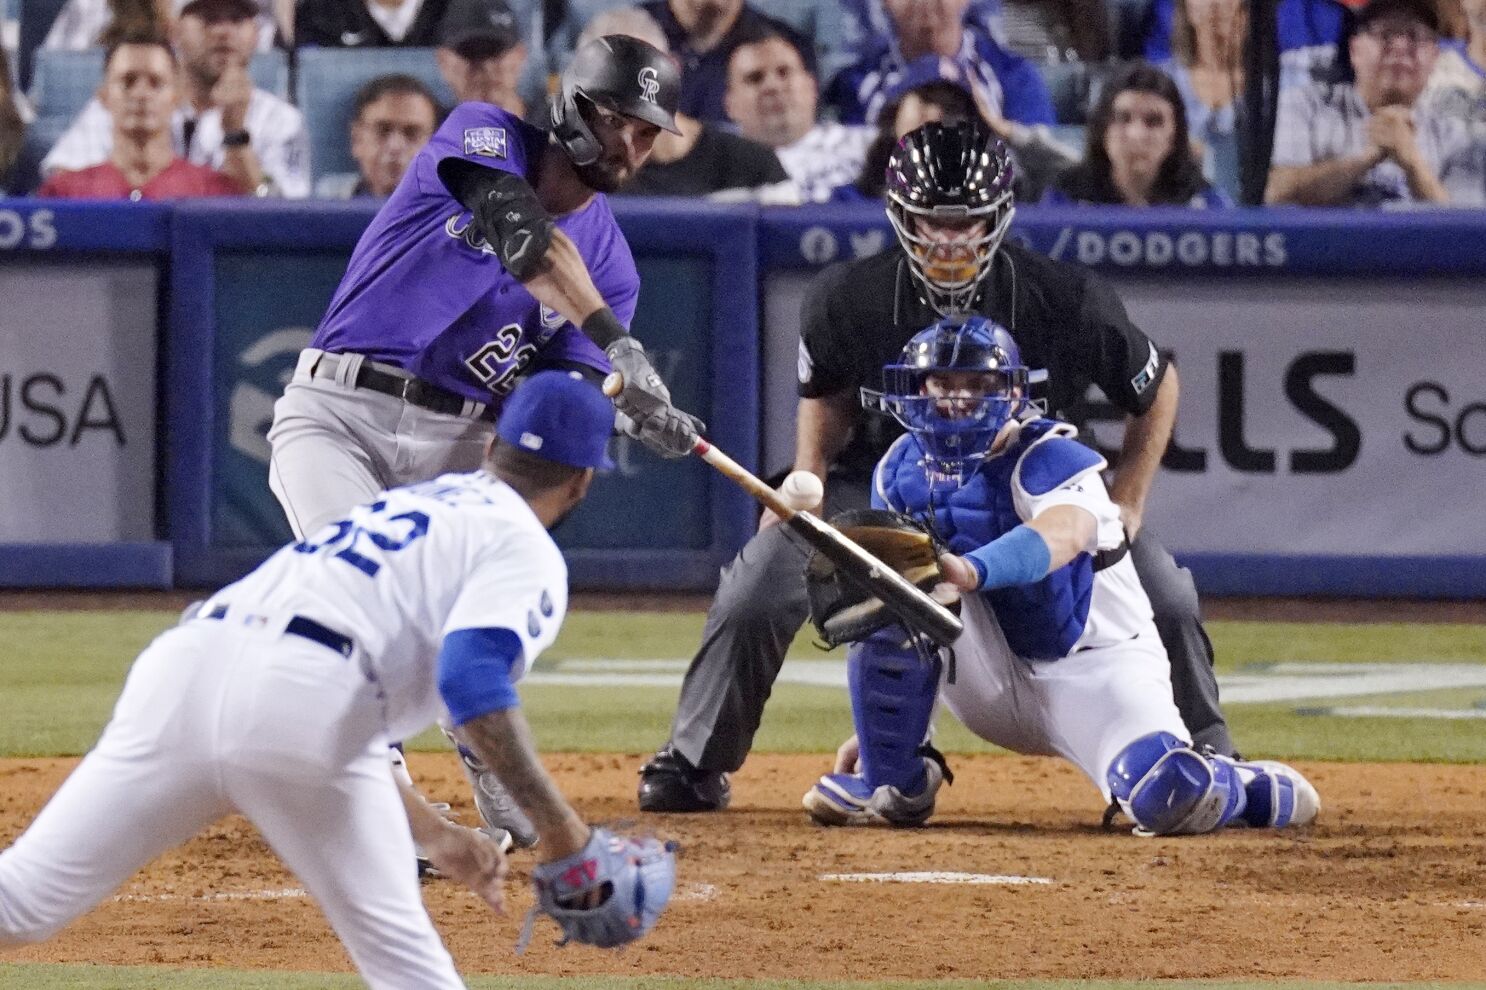 Justin Turner leads Dodgers' offense in win over Colorado Rockies